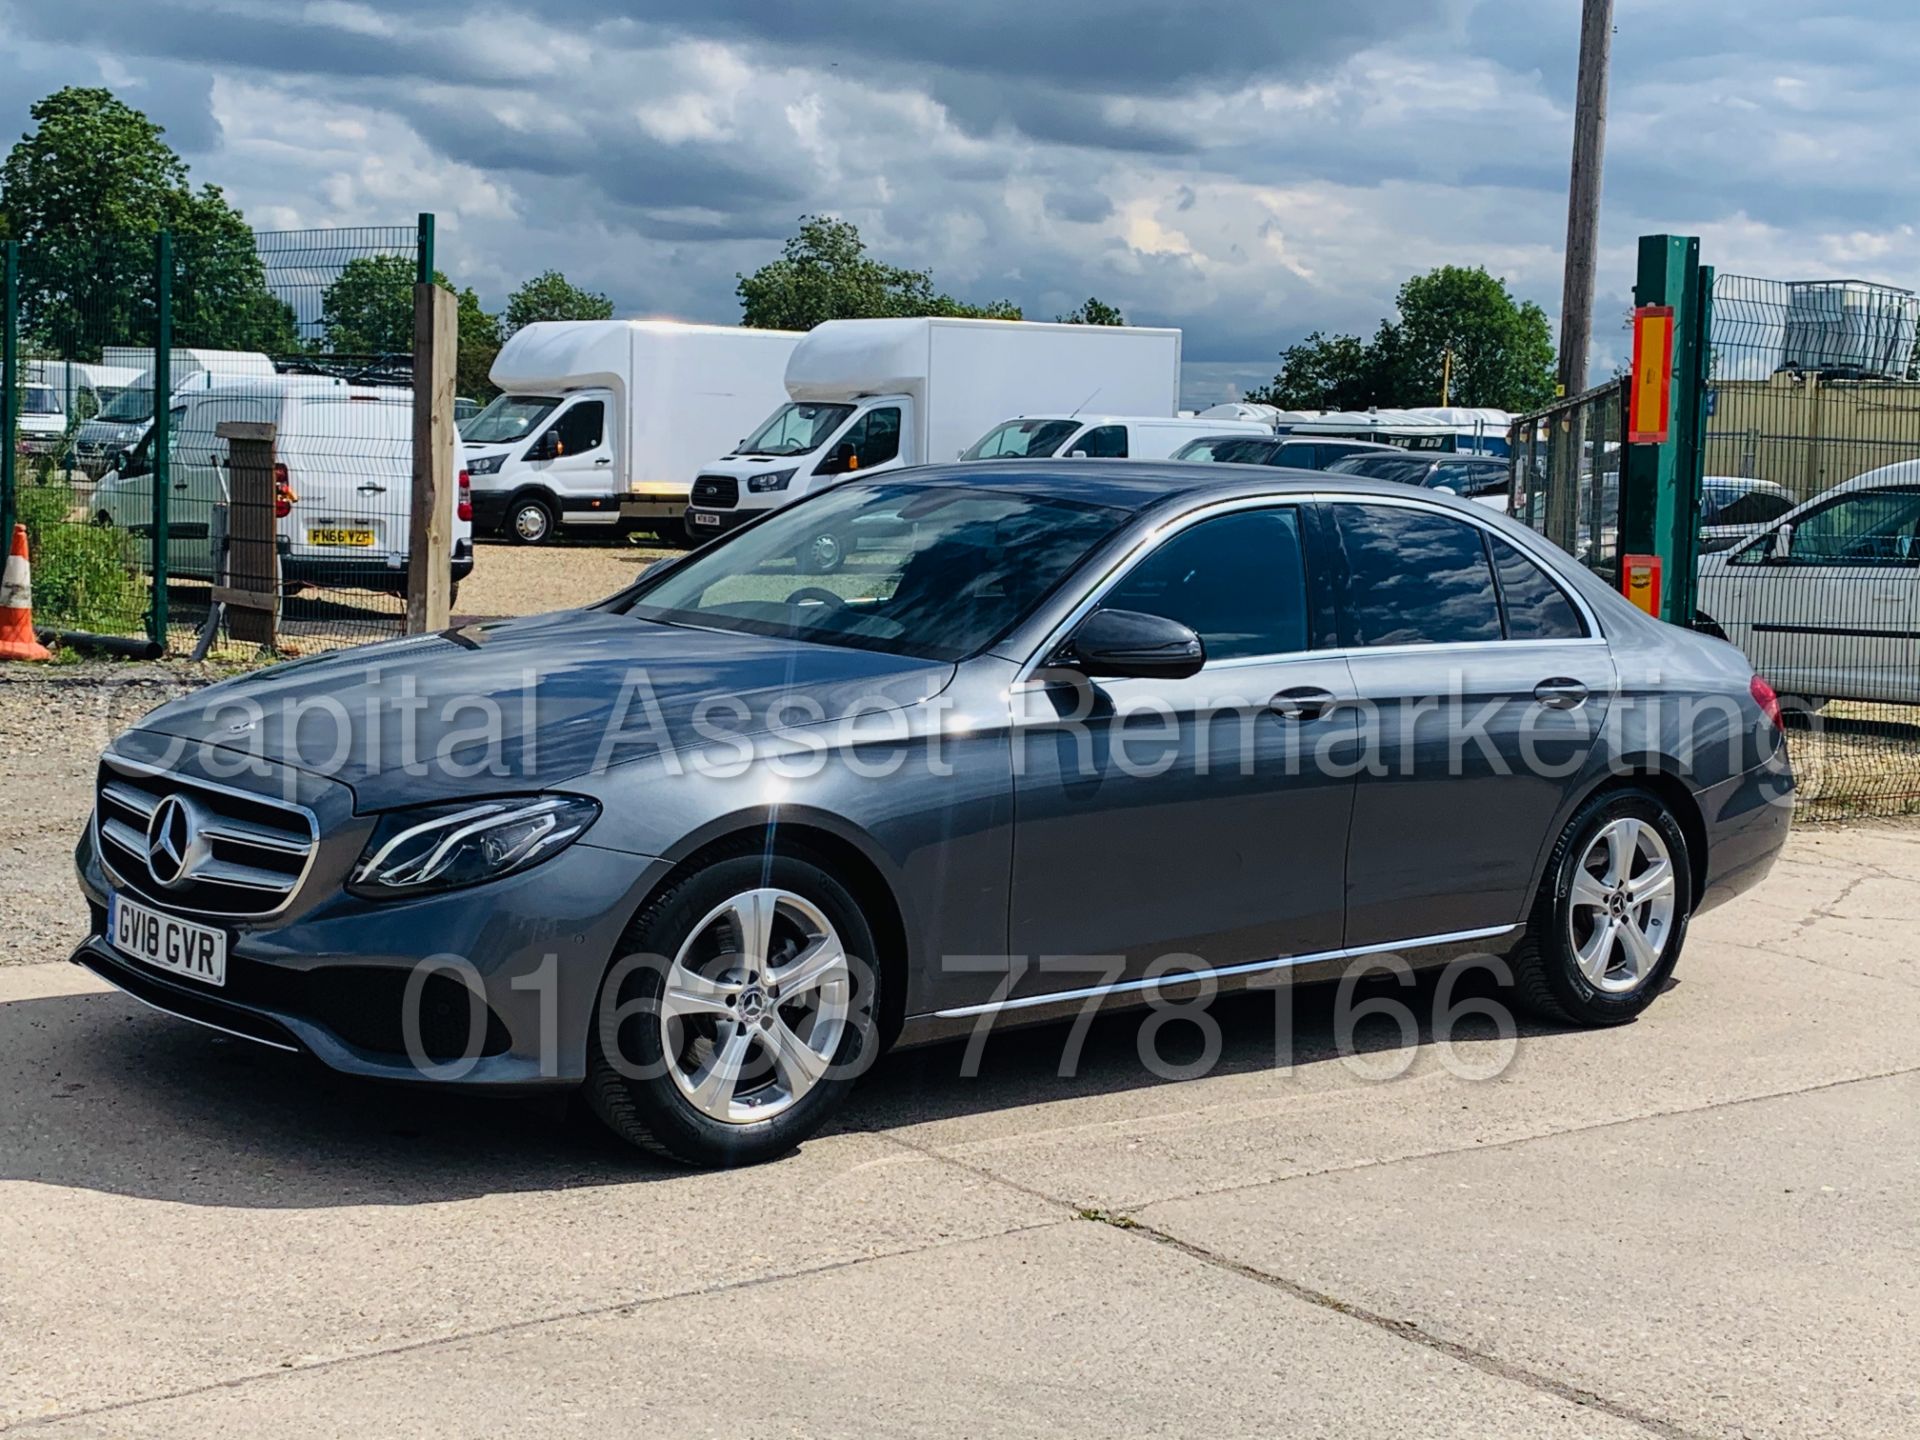 (On Sale) MERCEDES-BENZ E220D *SALOON* (2018 - NEW MODEL) '9-G TRONIC AUTO - LEATHER - SAT NAV' - Image 7 of 56